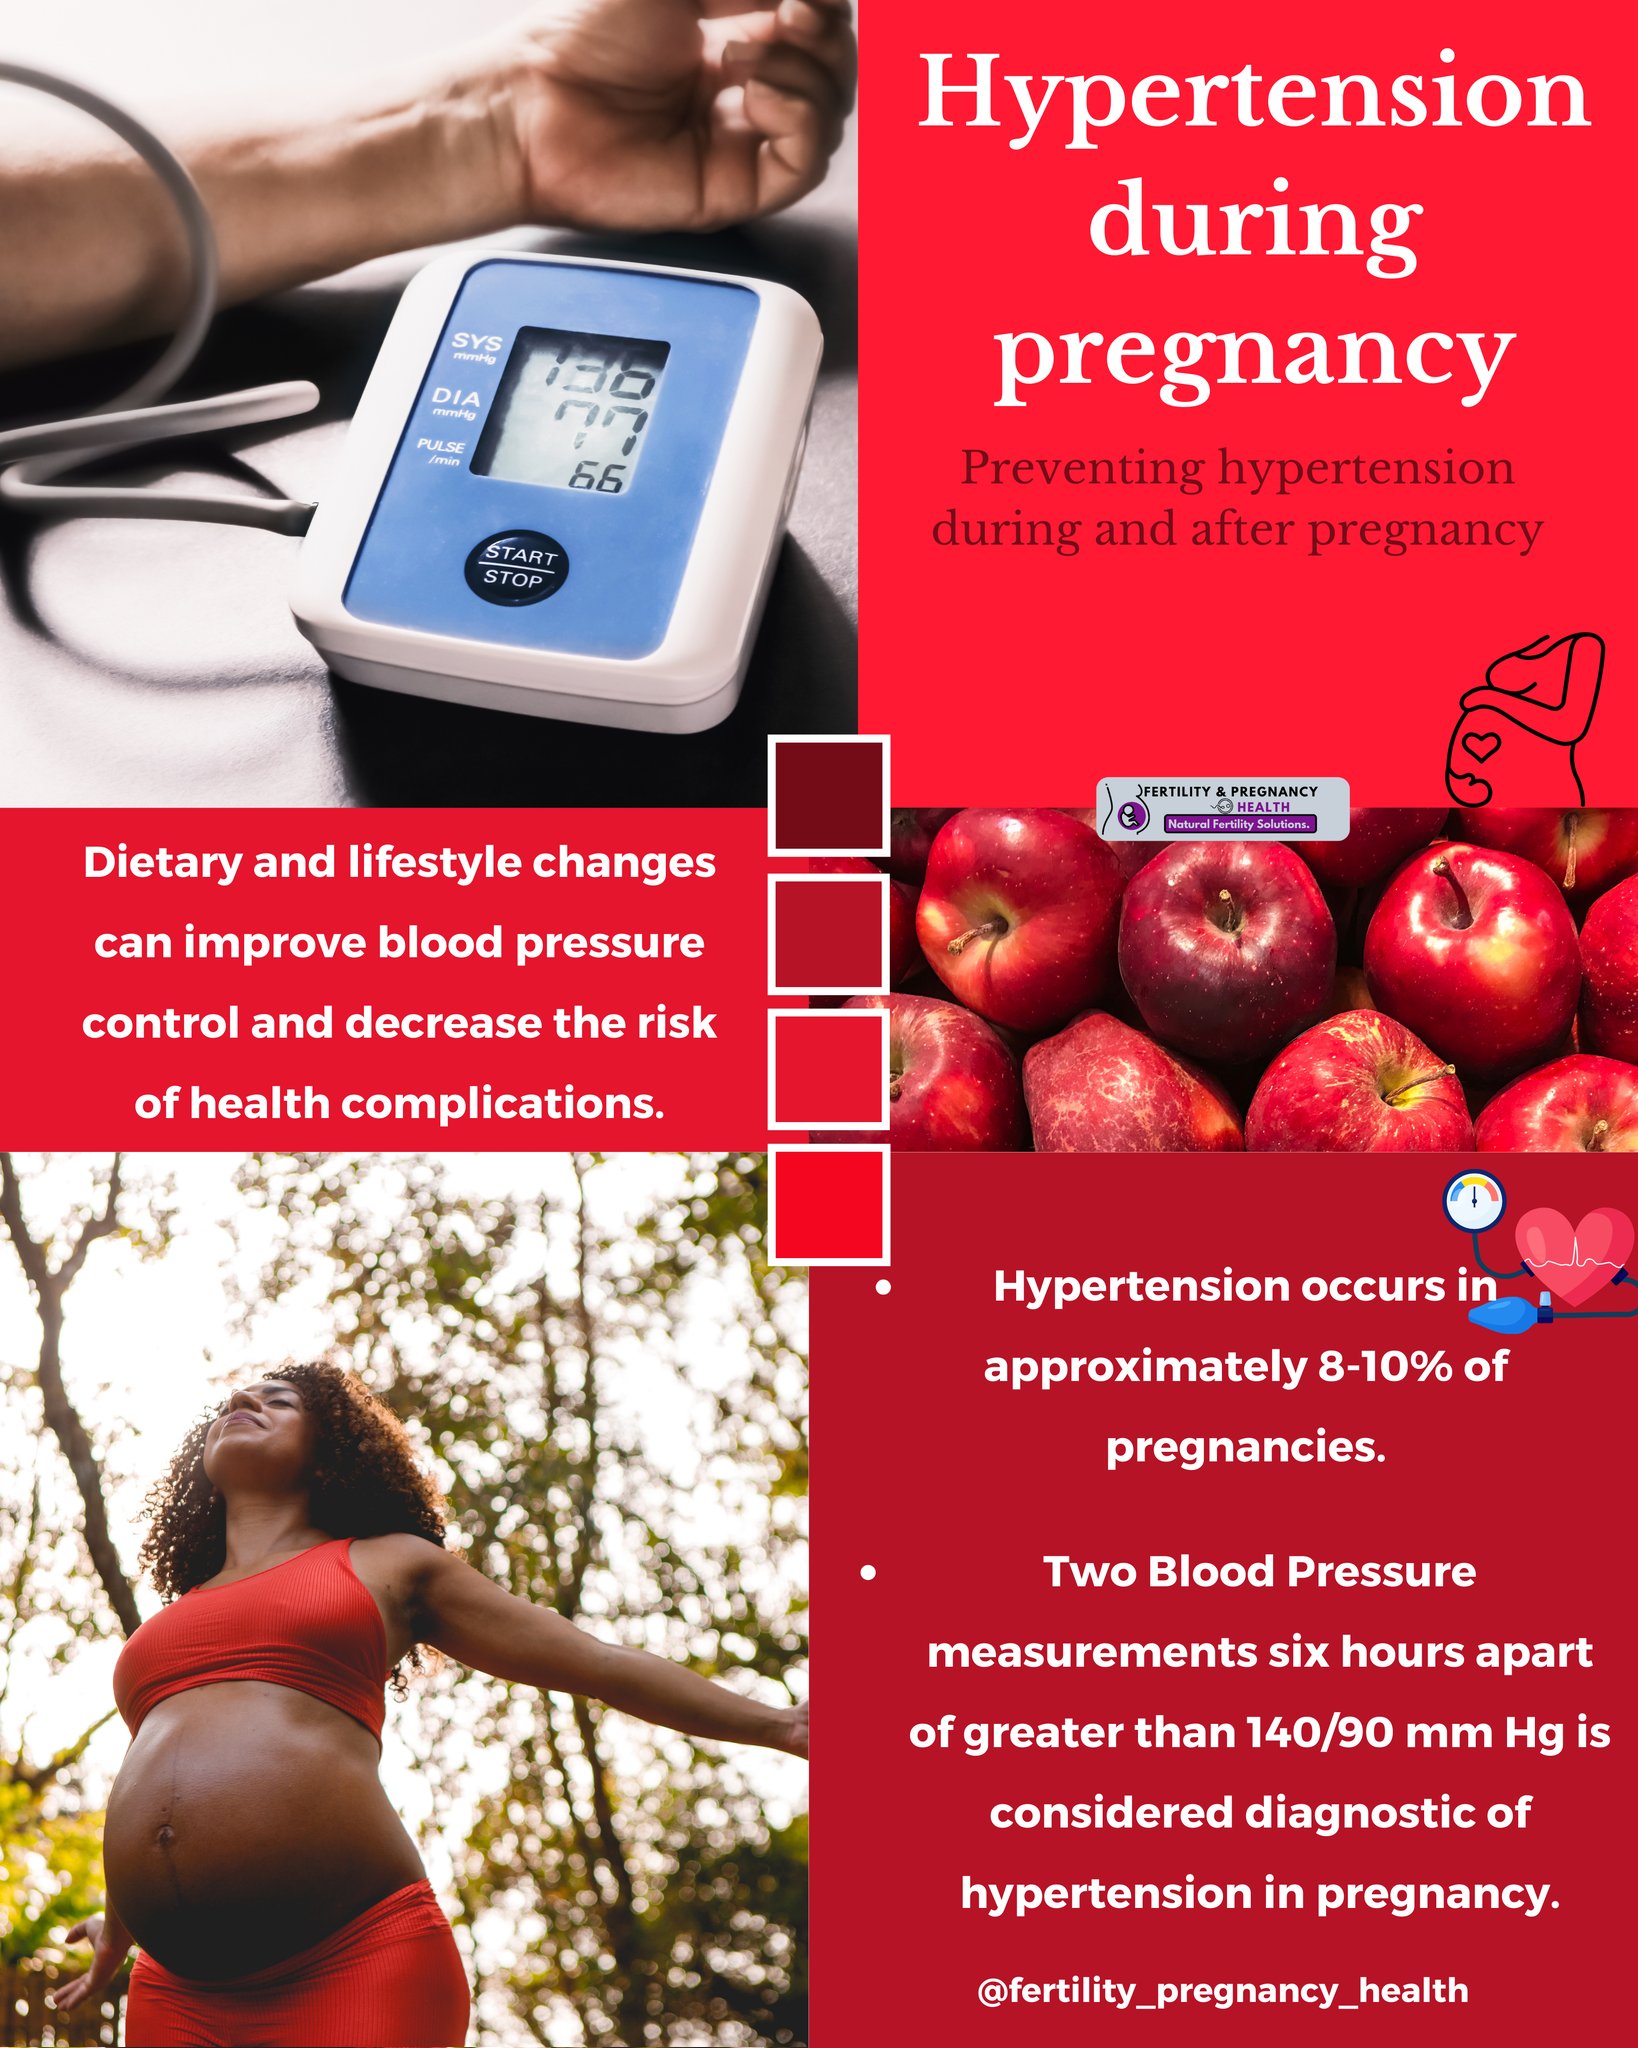 Fertility and pregnancy health on X: #HighBloodPressure in pregnancy may  be the first sign of pre-eclampsia, which is responsible for 16% of  maternal deaths globally. Hypertension occurs in approximately 8-10% of  pregnancies.